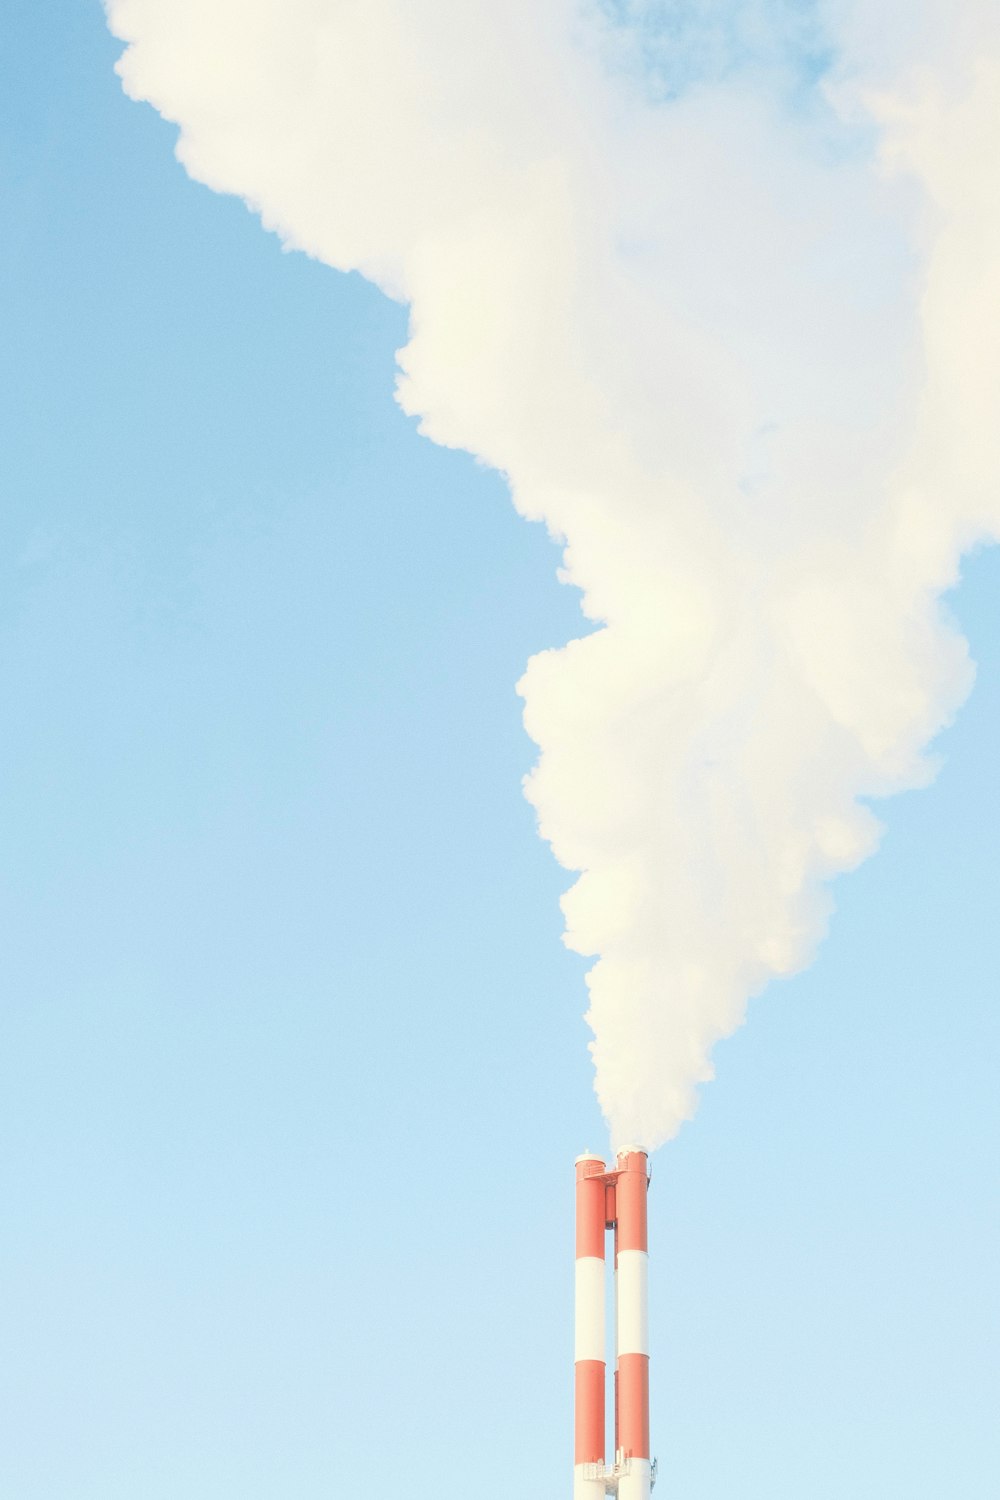 a smokestack emits from a pipe in front of a blue sky